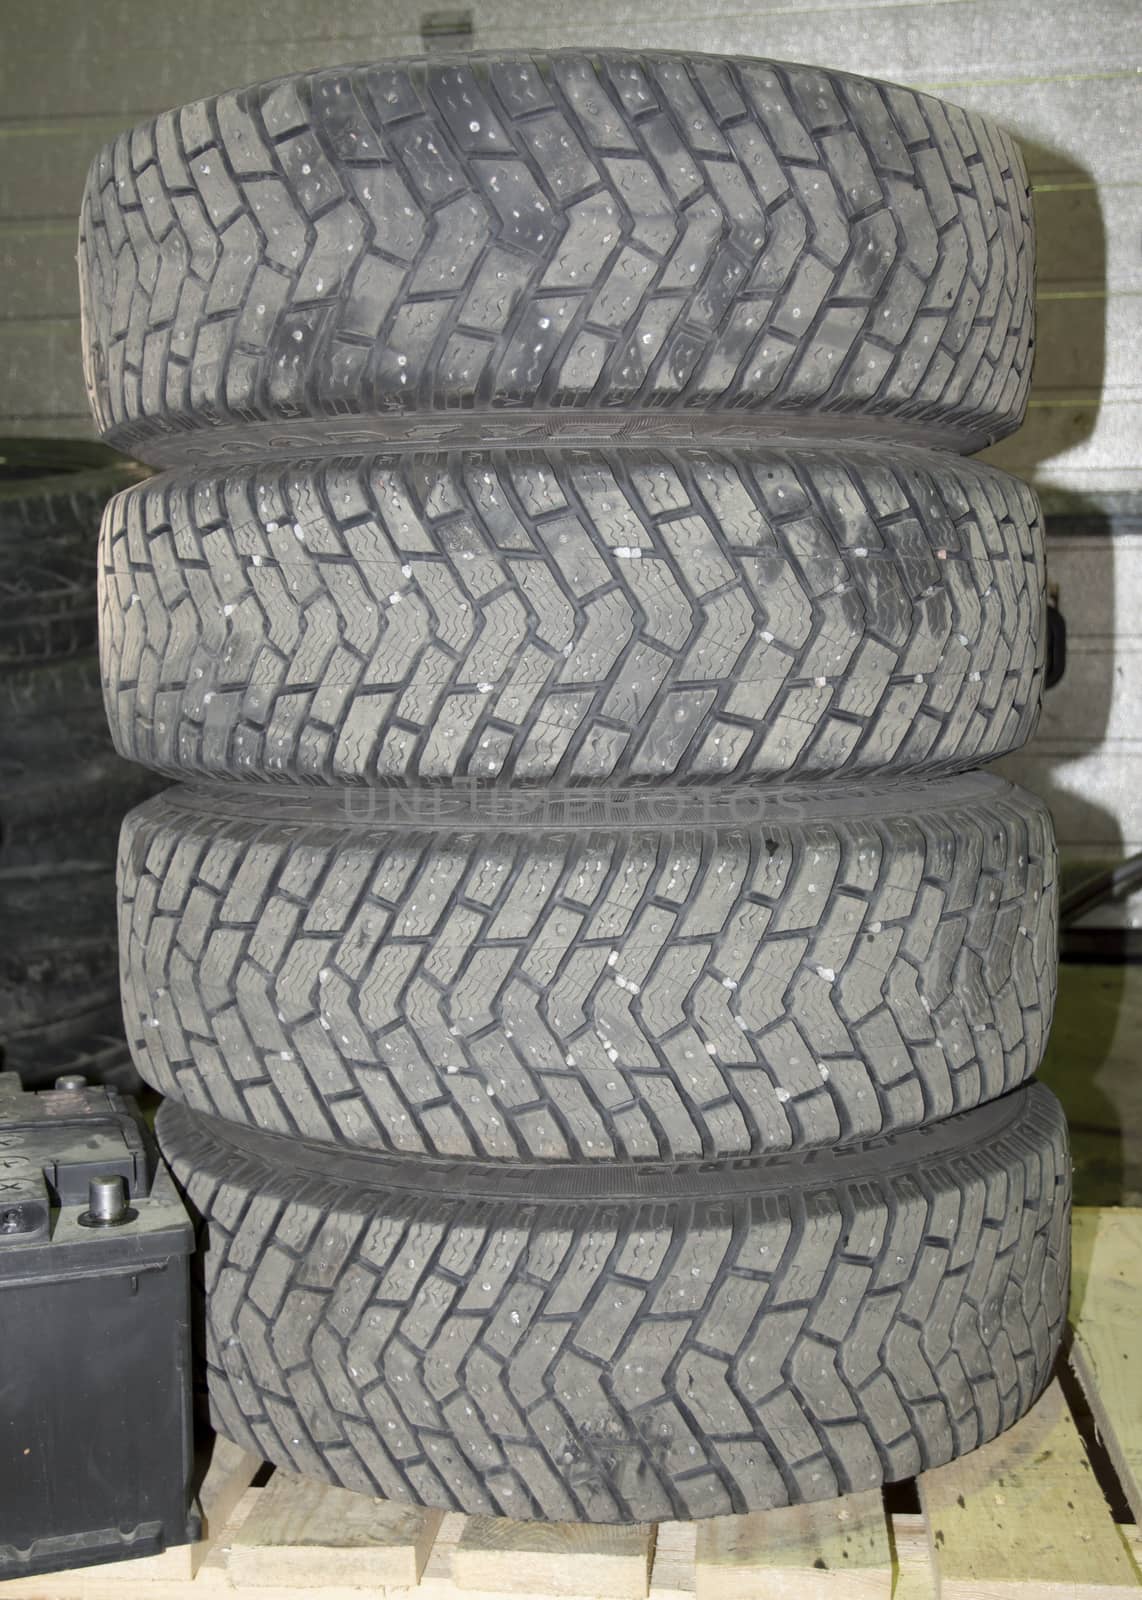 Pile of summer tires. Car mechanic garage switch to or from summer or winter tires in April or October.